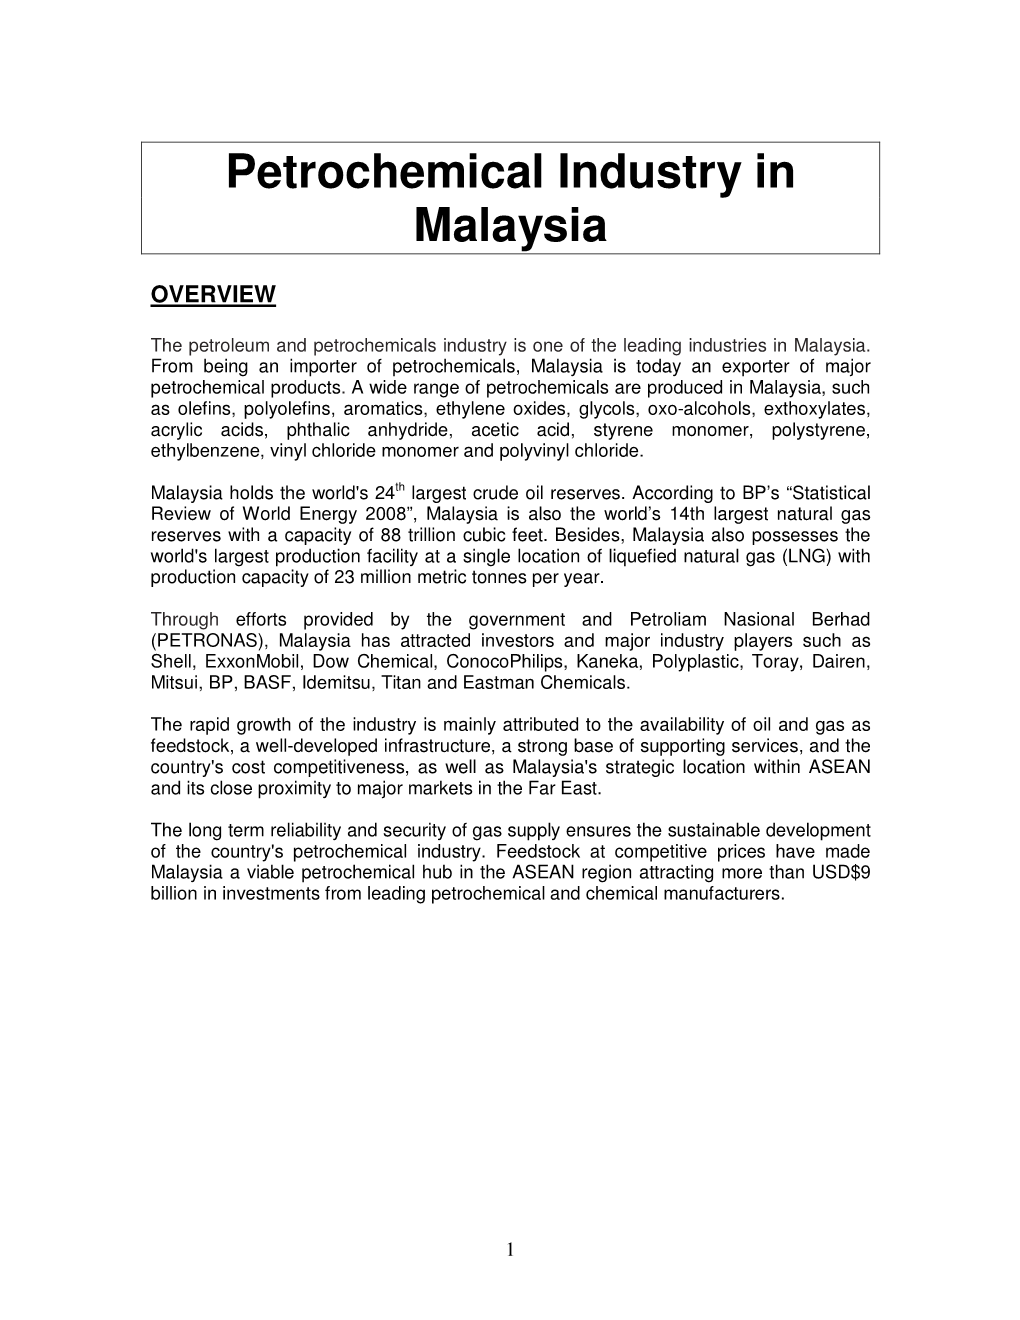 Petrochemical Industry in Malaysia